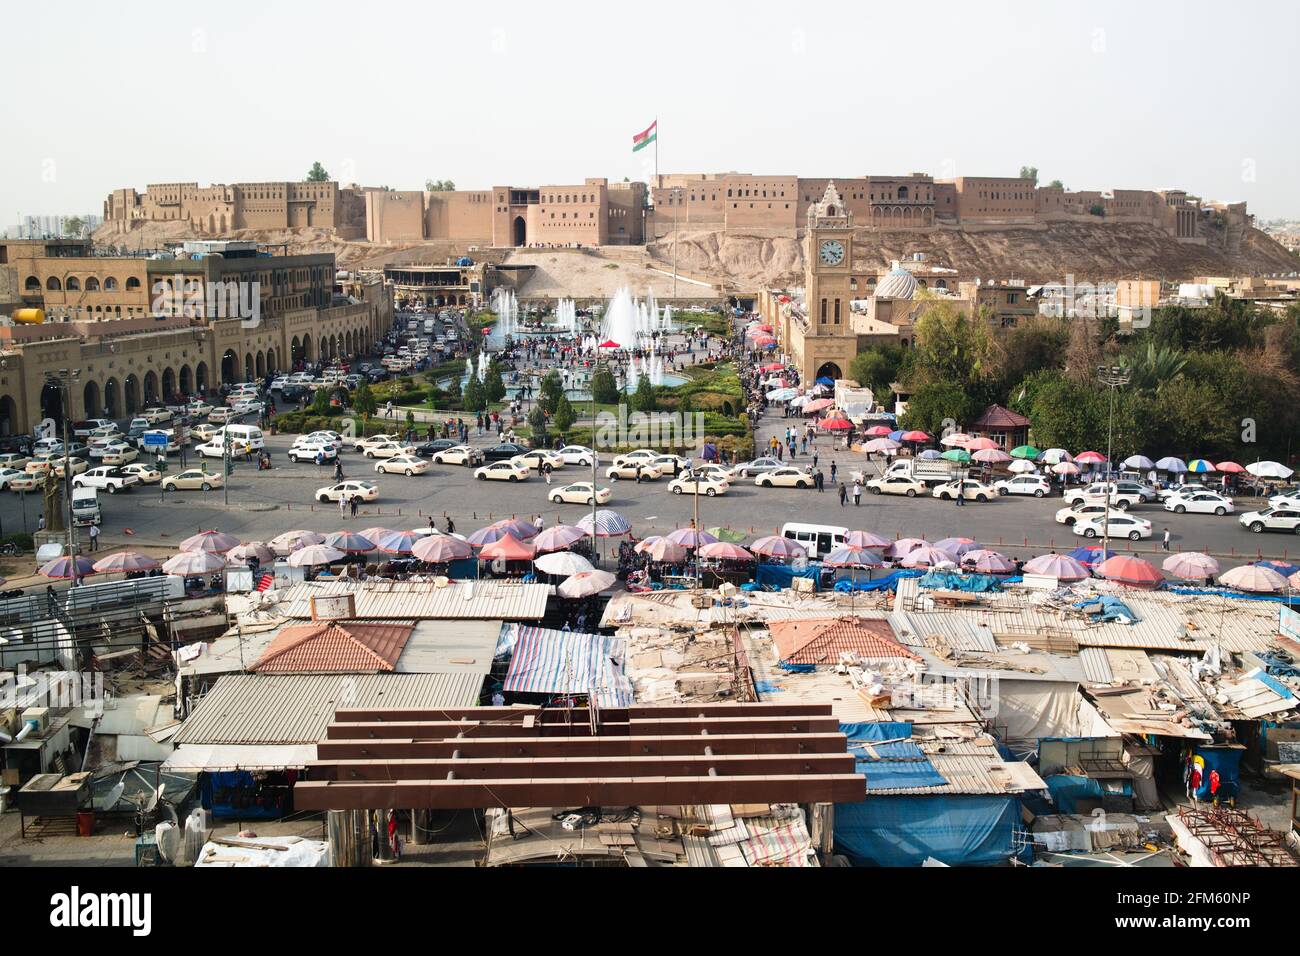 Erbil's citadel, one of the longest continuously inhabited places on Earth Stock Photo